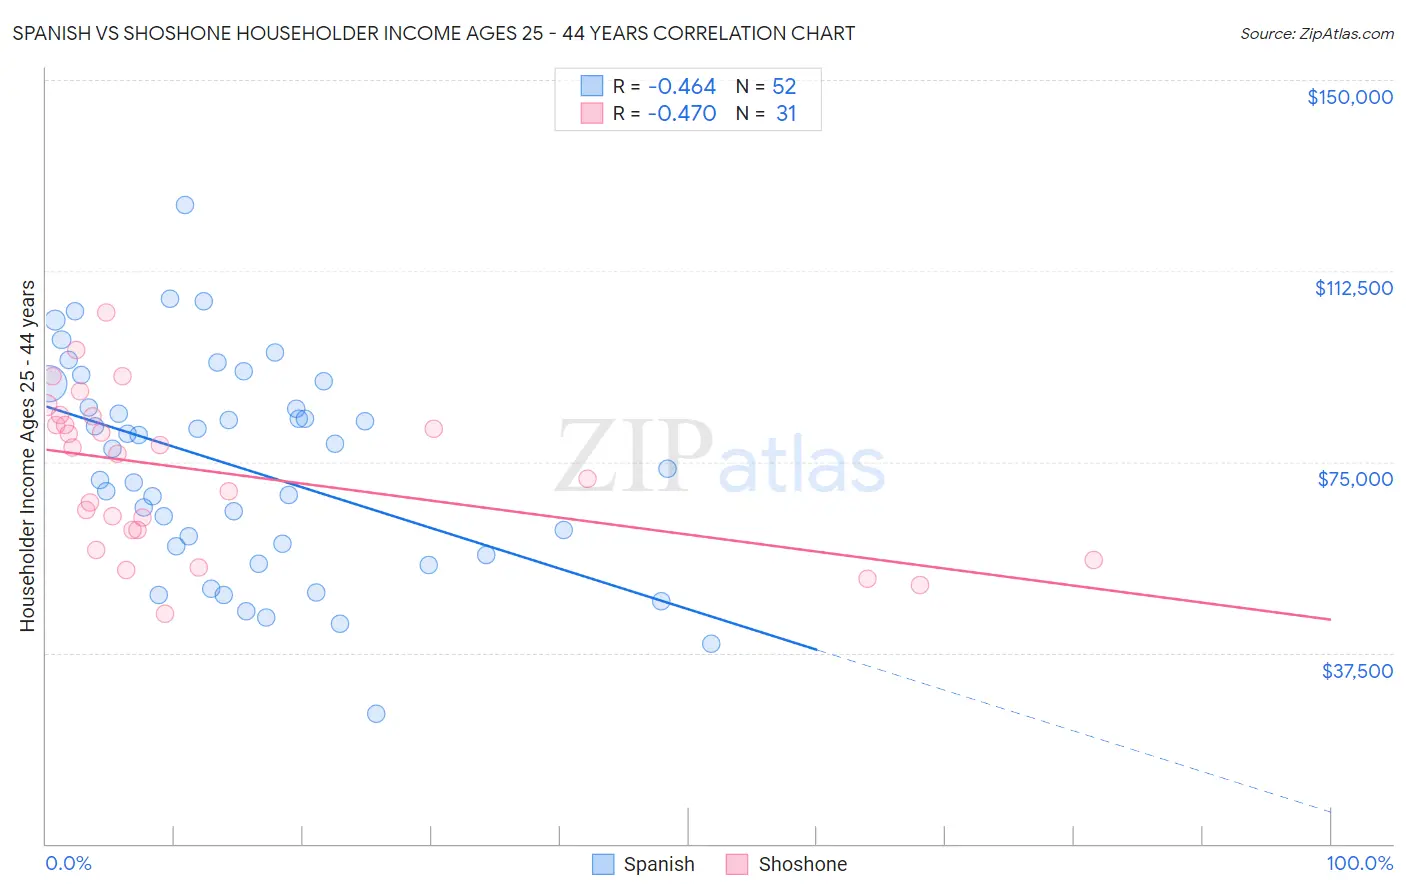 Spanish vs Shoshone Householder Income Ages 25 - 44 years